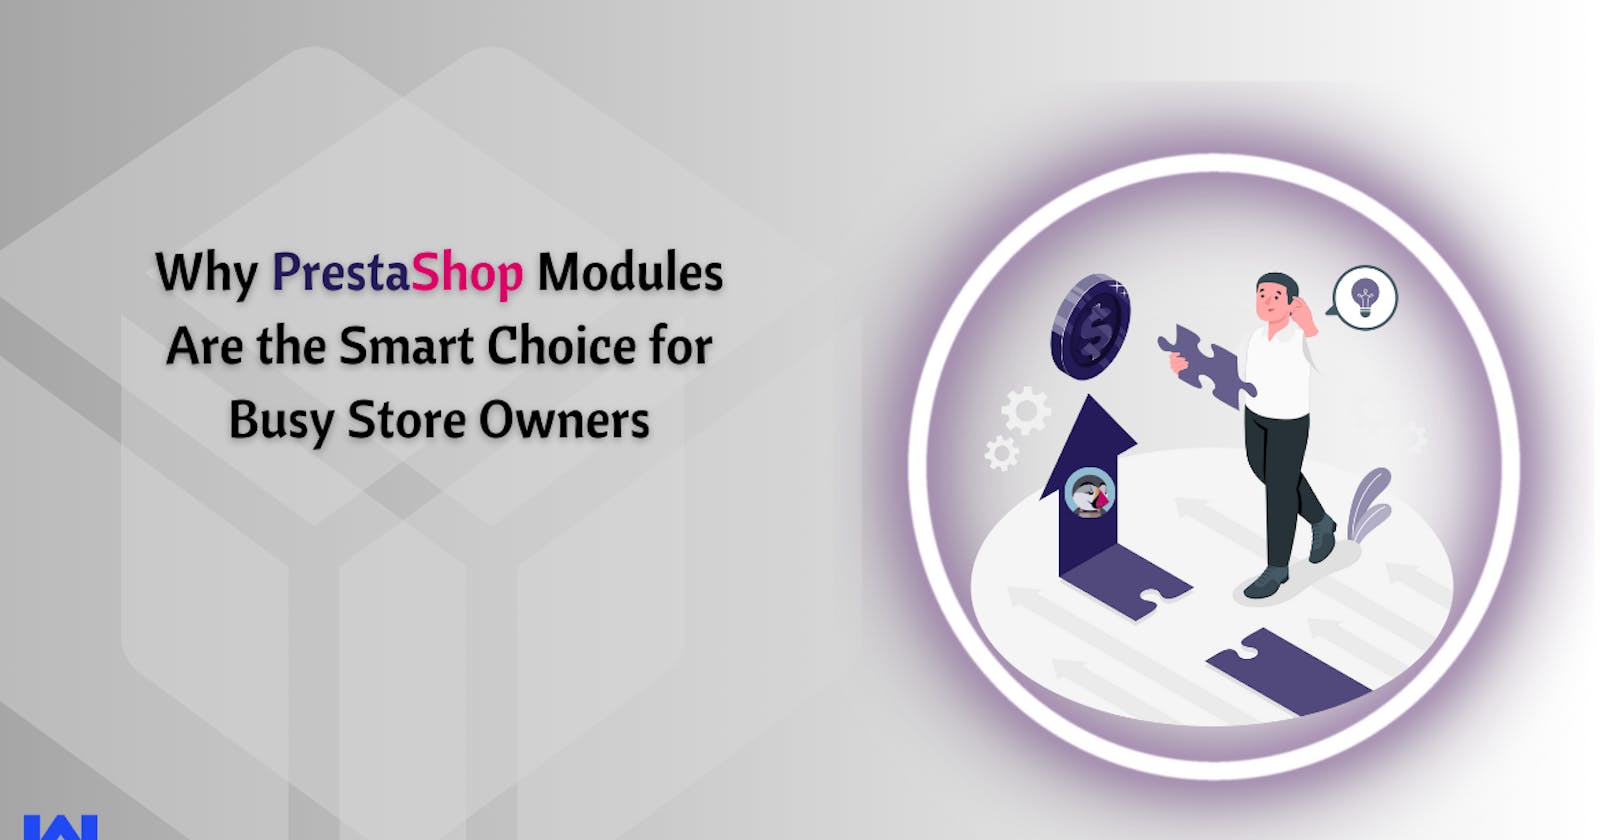 Why PrestaShop Modules Are the Smart Choice for Busy Store Owners